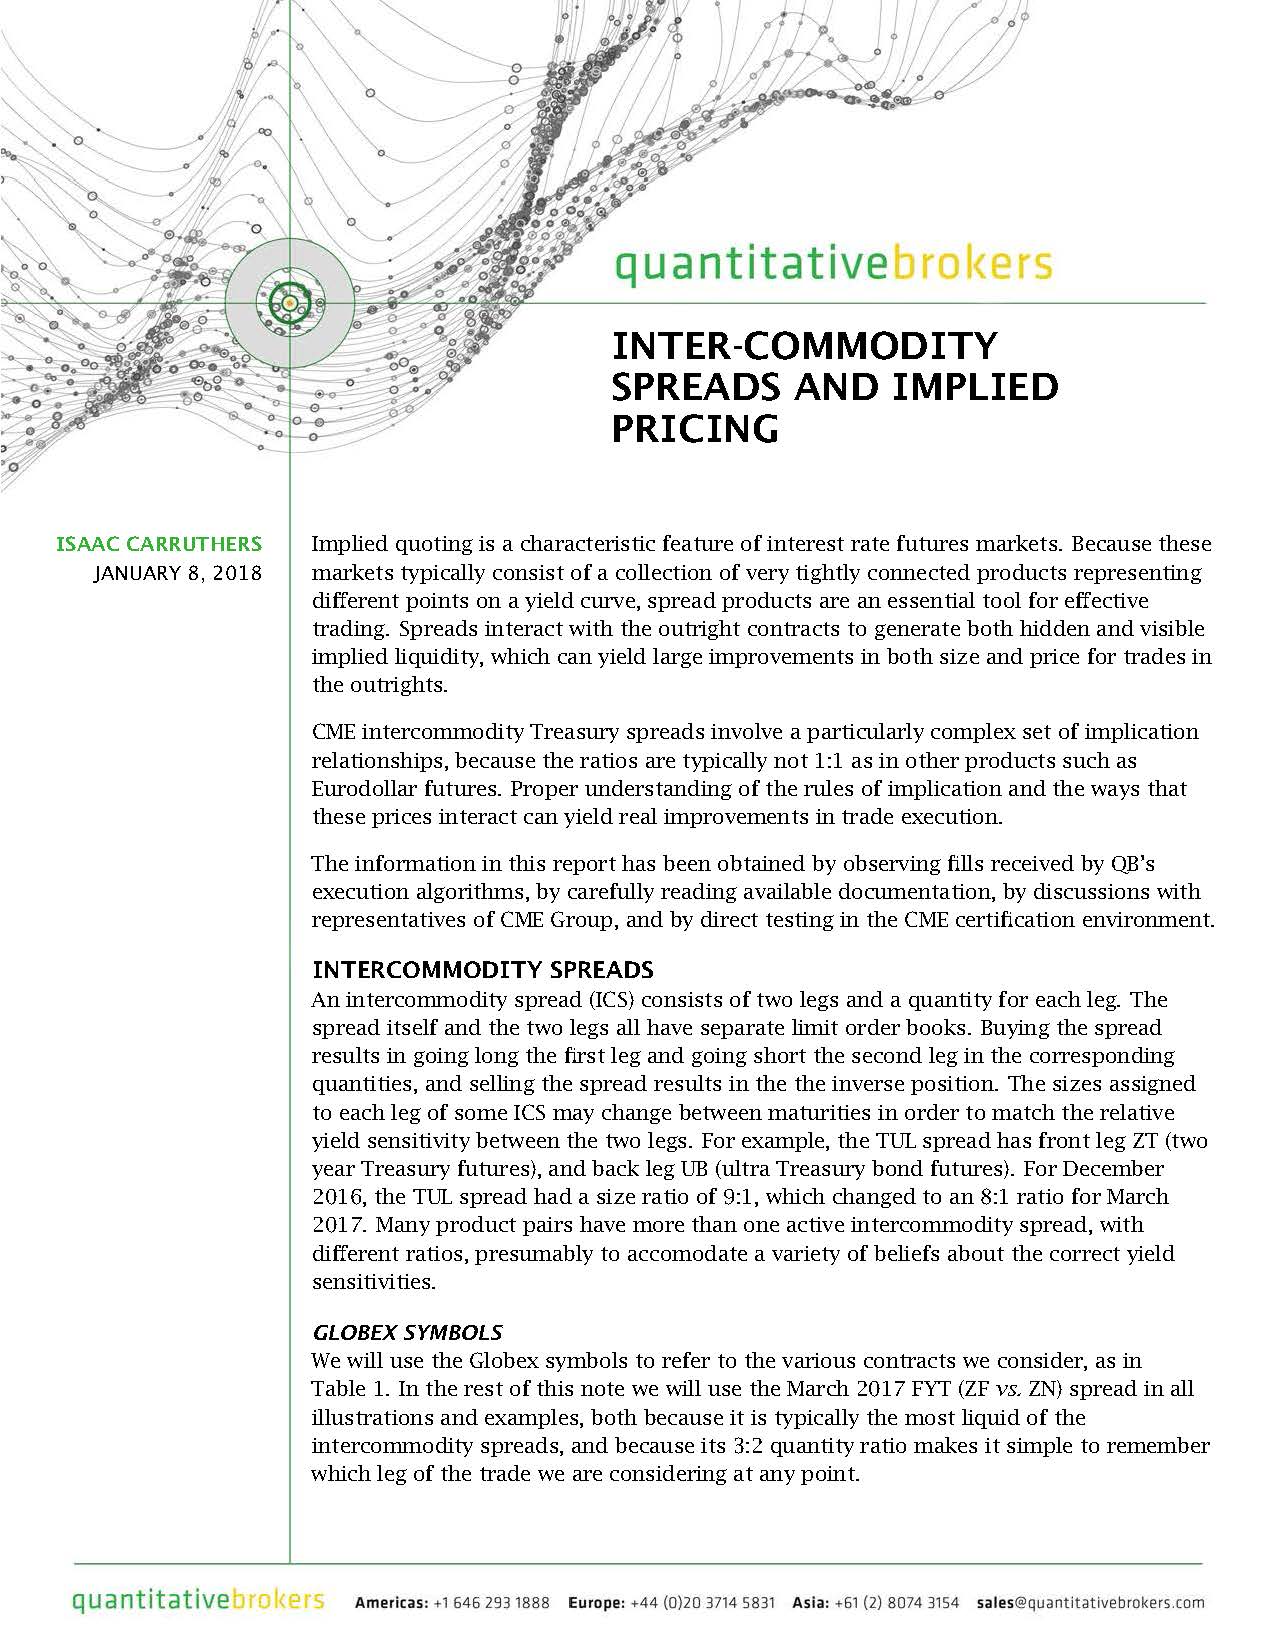 Sample front page of
				 Quantitative Analysis Report,
				 an aesthetic design implemented by TeXnology.
				 Click on image to go to page showing pdf of
				 sample Quantative Analysis report.